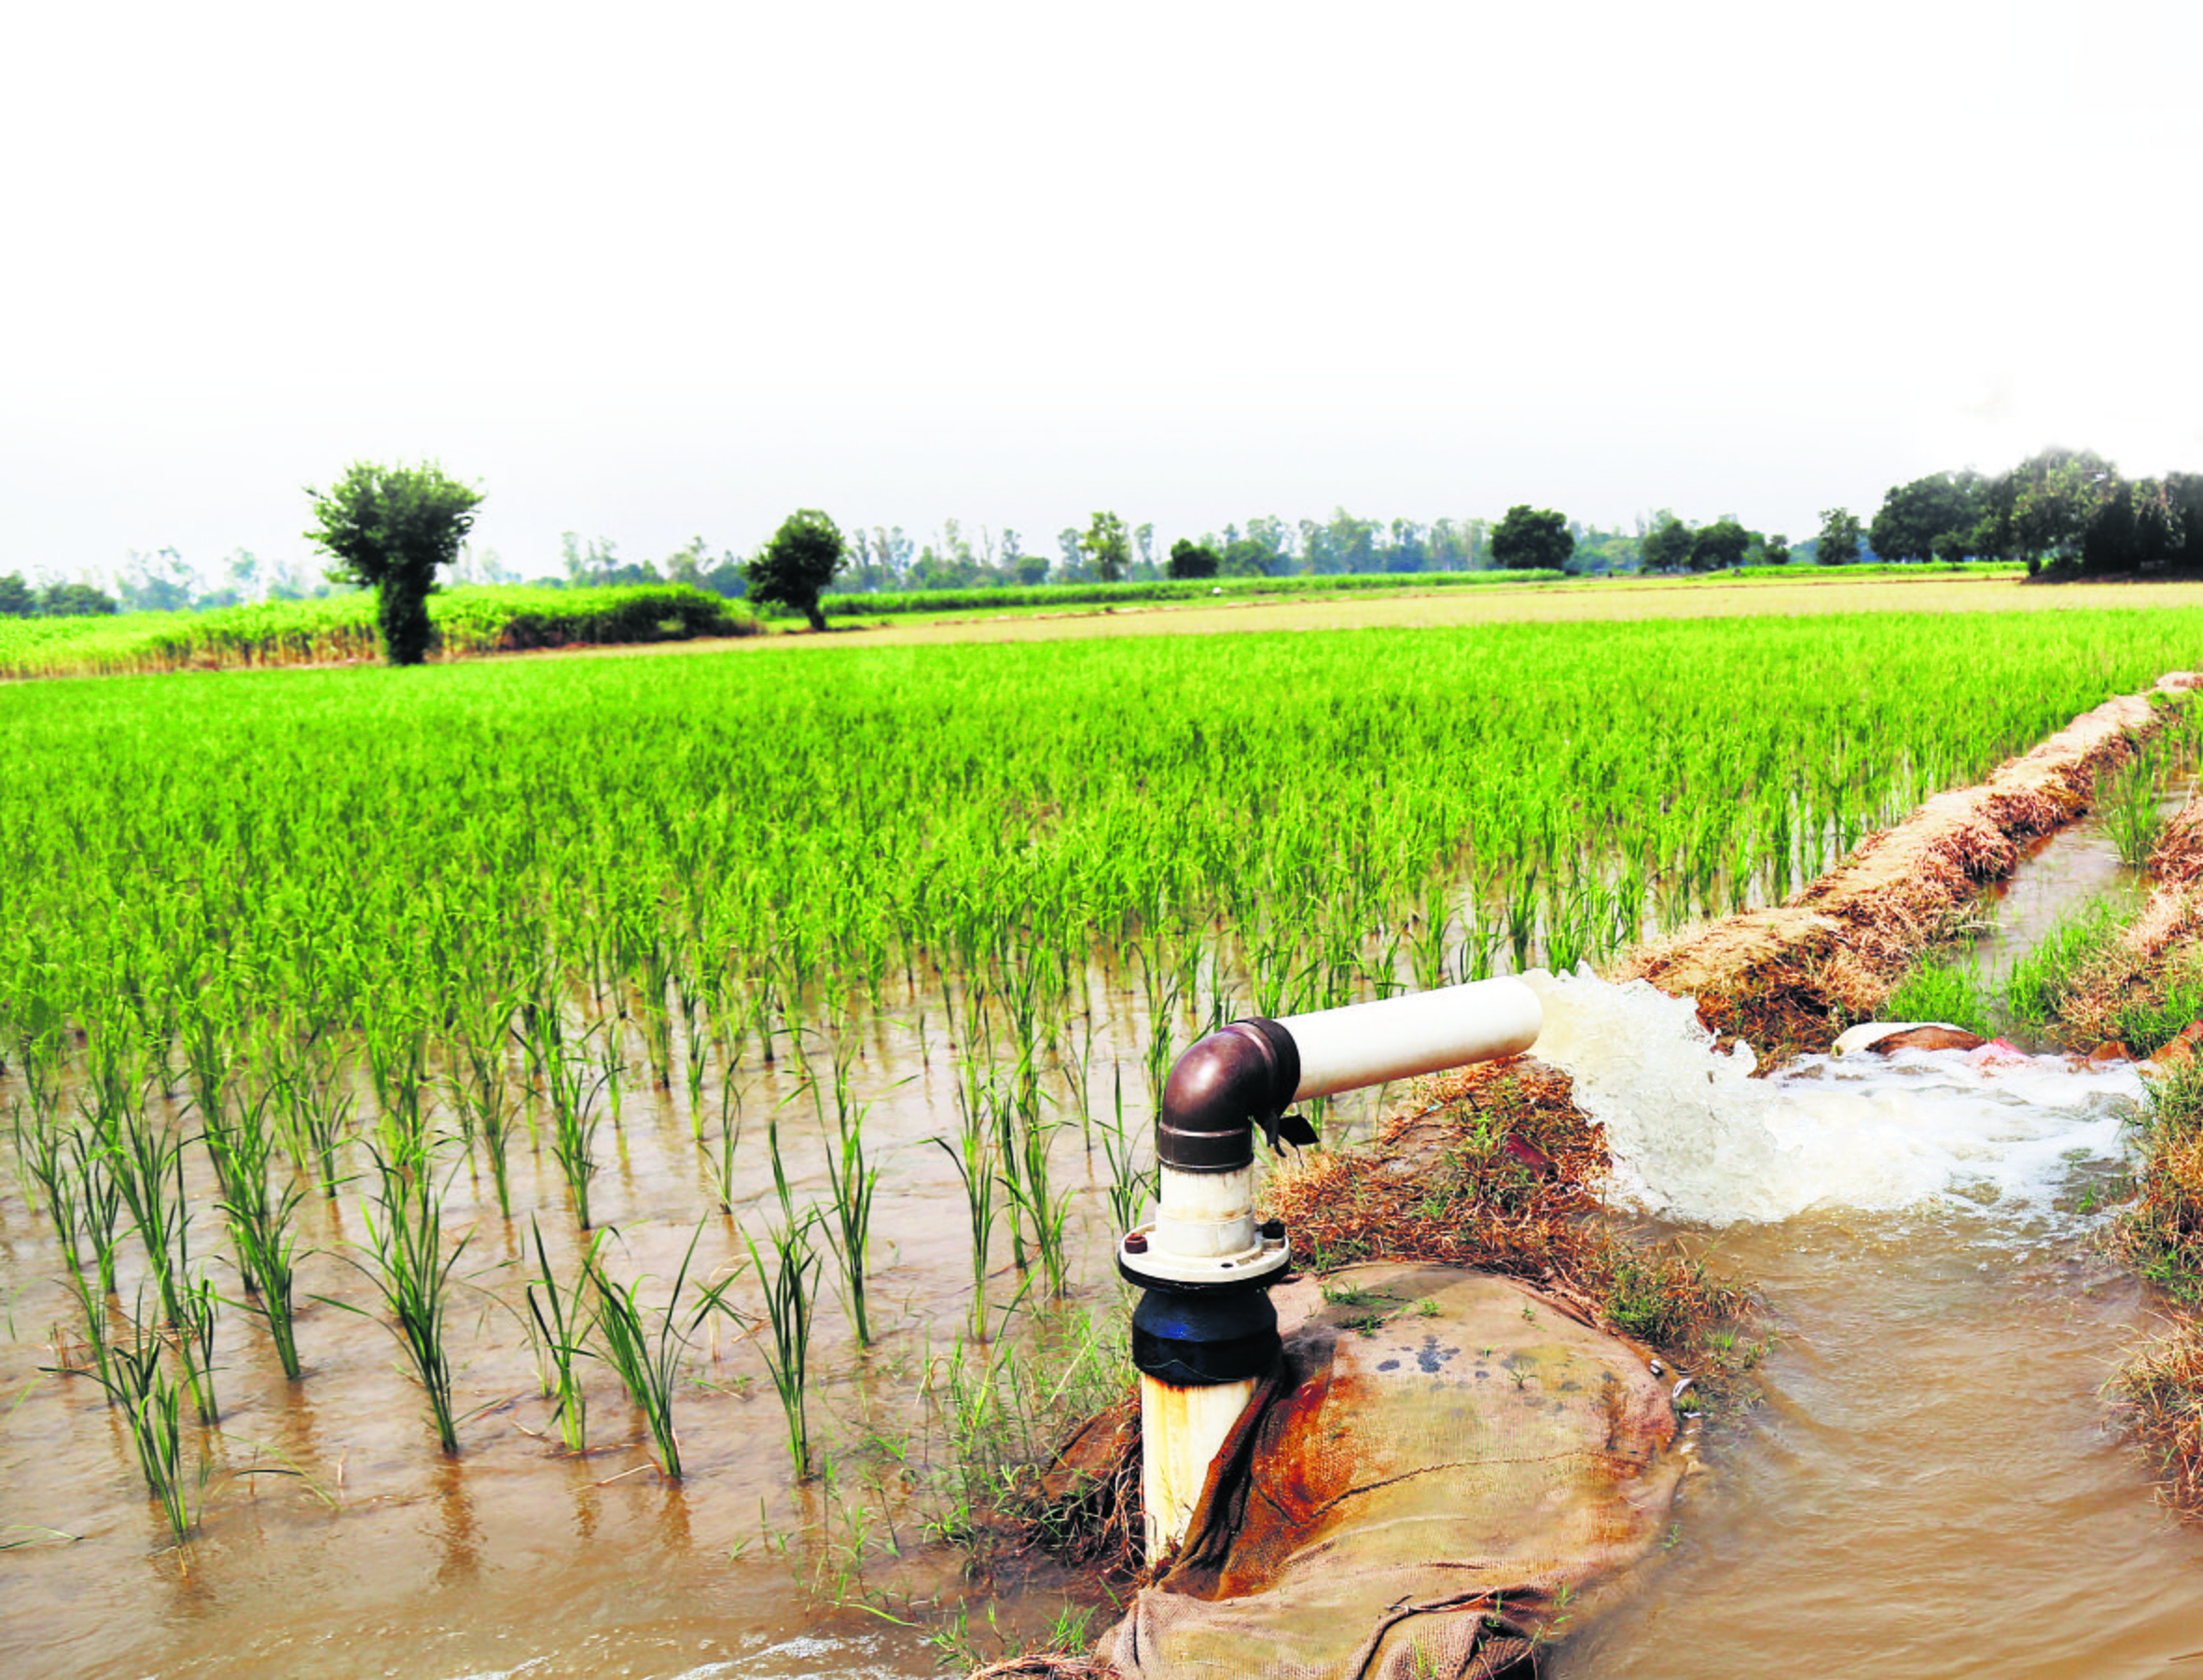 Groundwater harder than canal water in Karnal: Report